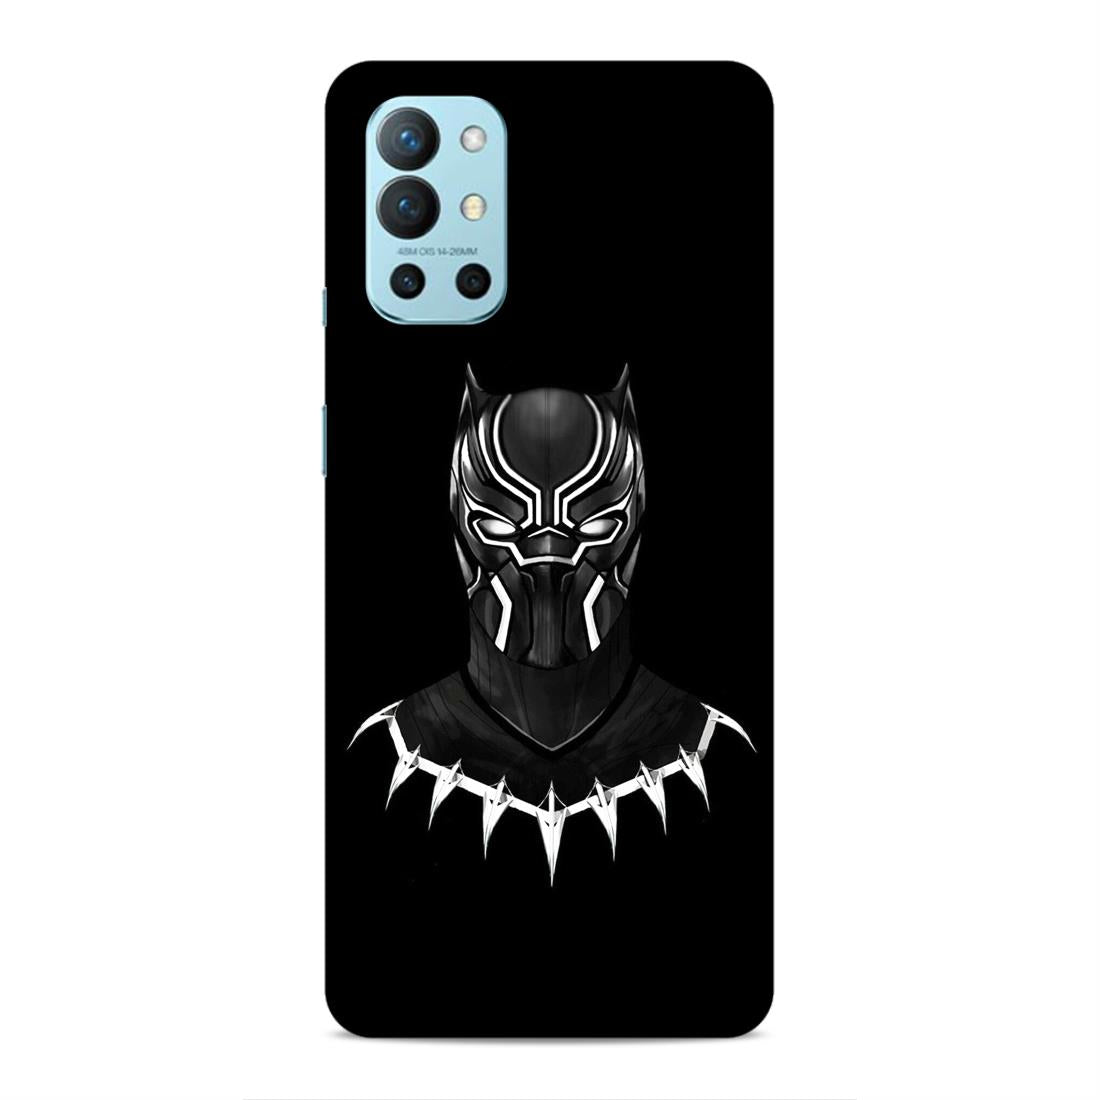 Black Panther Hard Back Case For OnePlus 8T / 9R